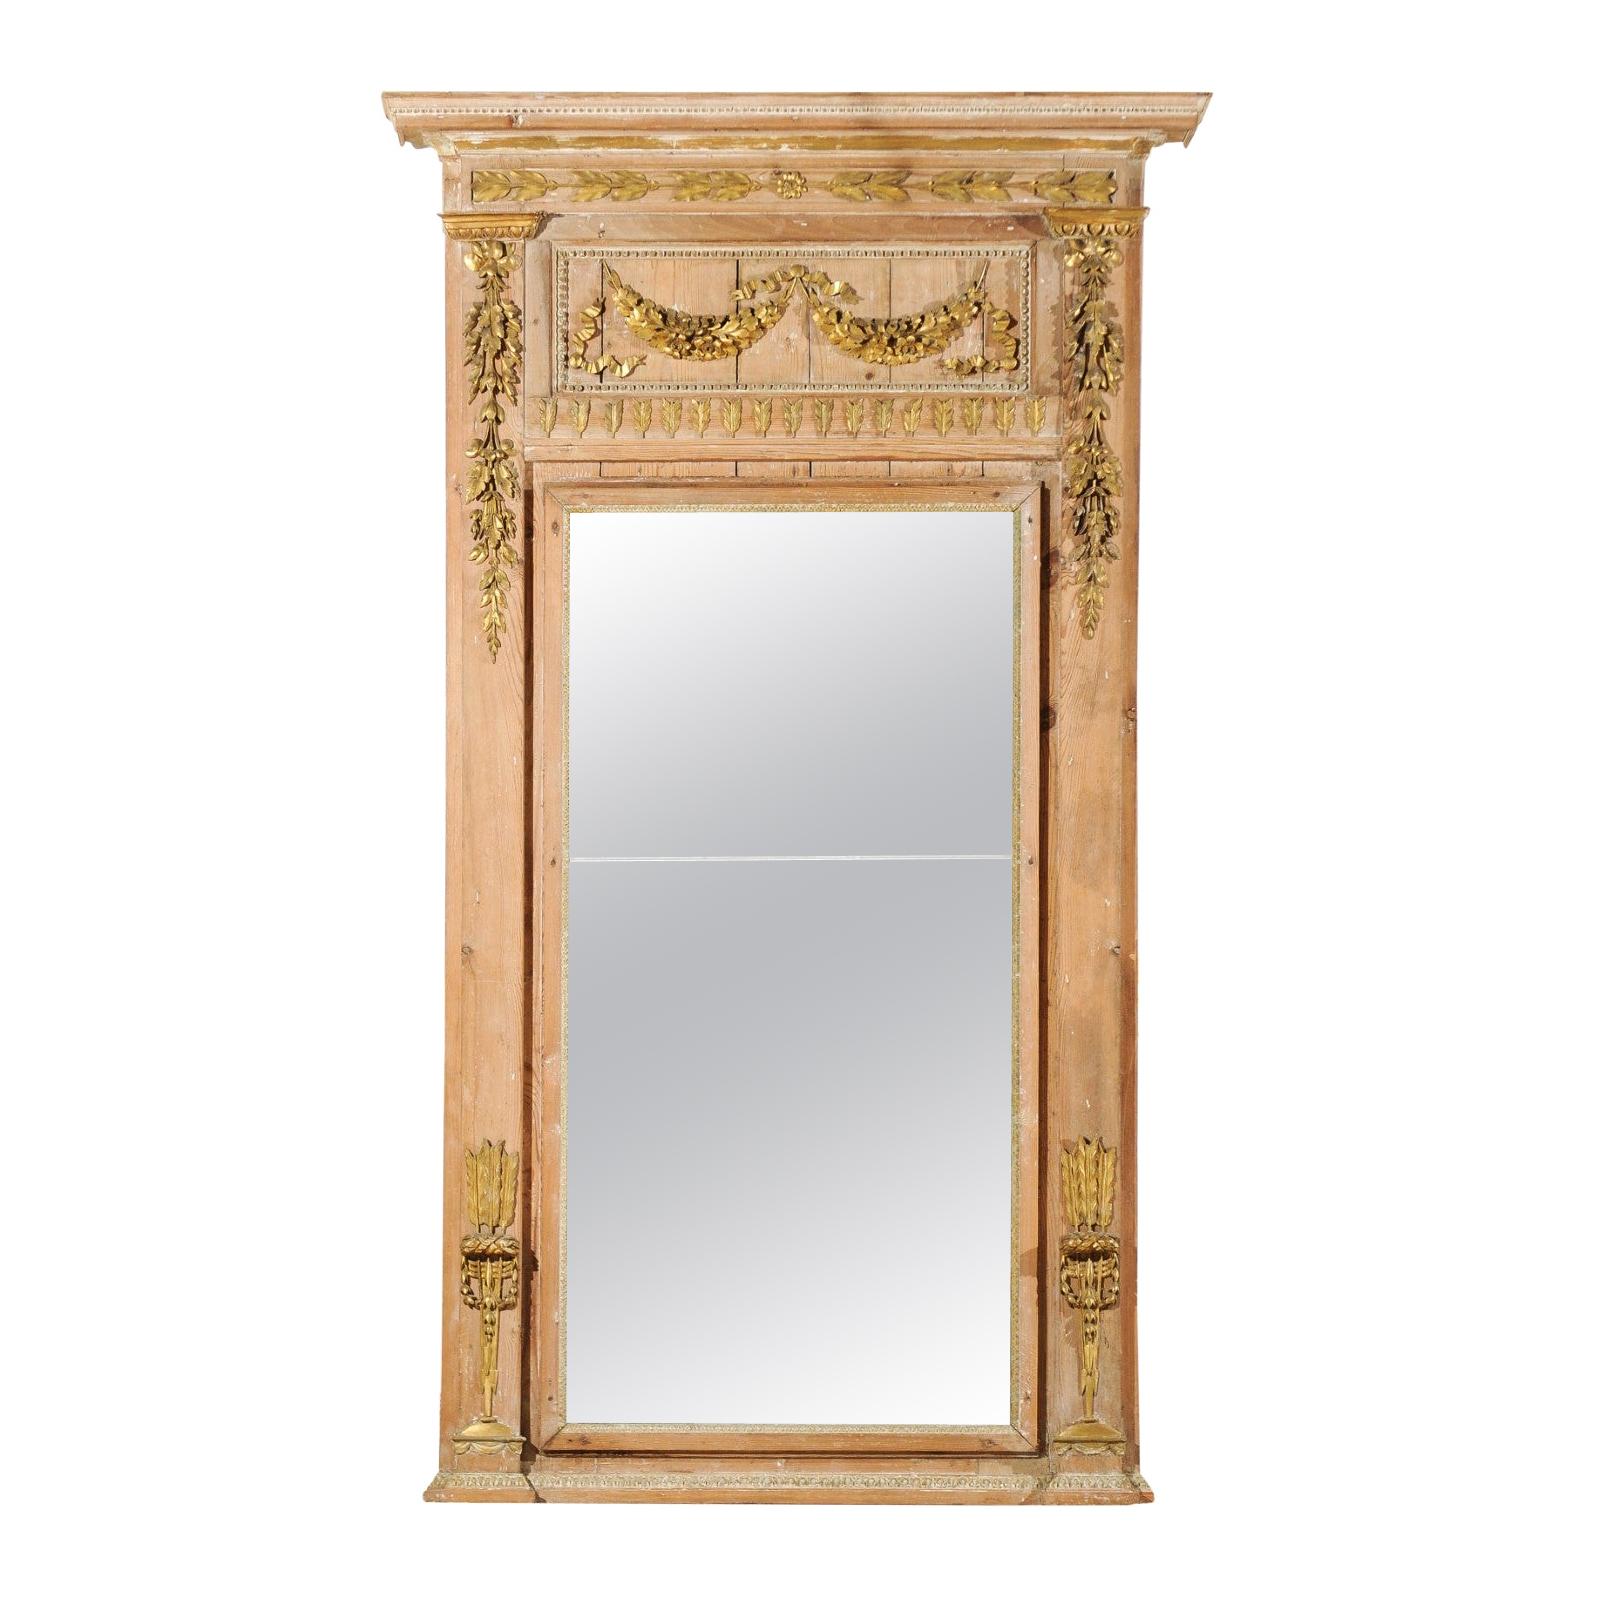 French Louis XVI Period 1780s Wooden Trumeau Mirror with Carved Giltwood Décor